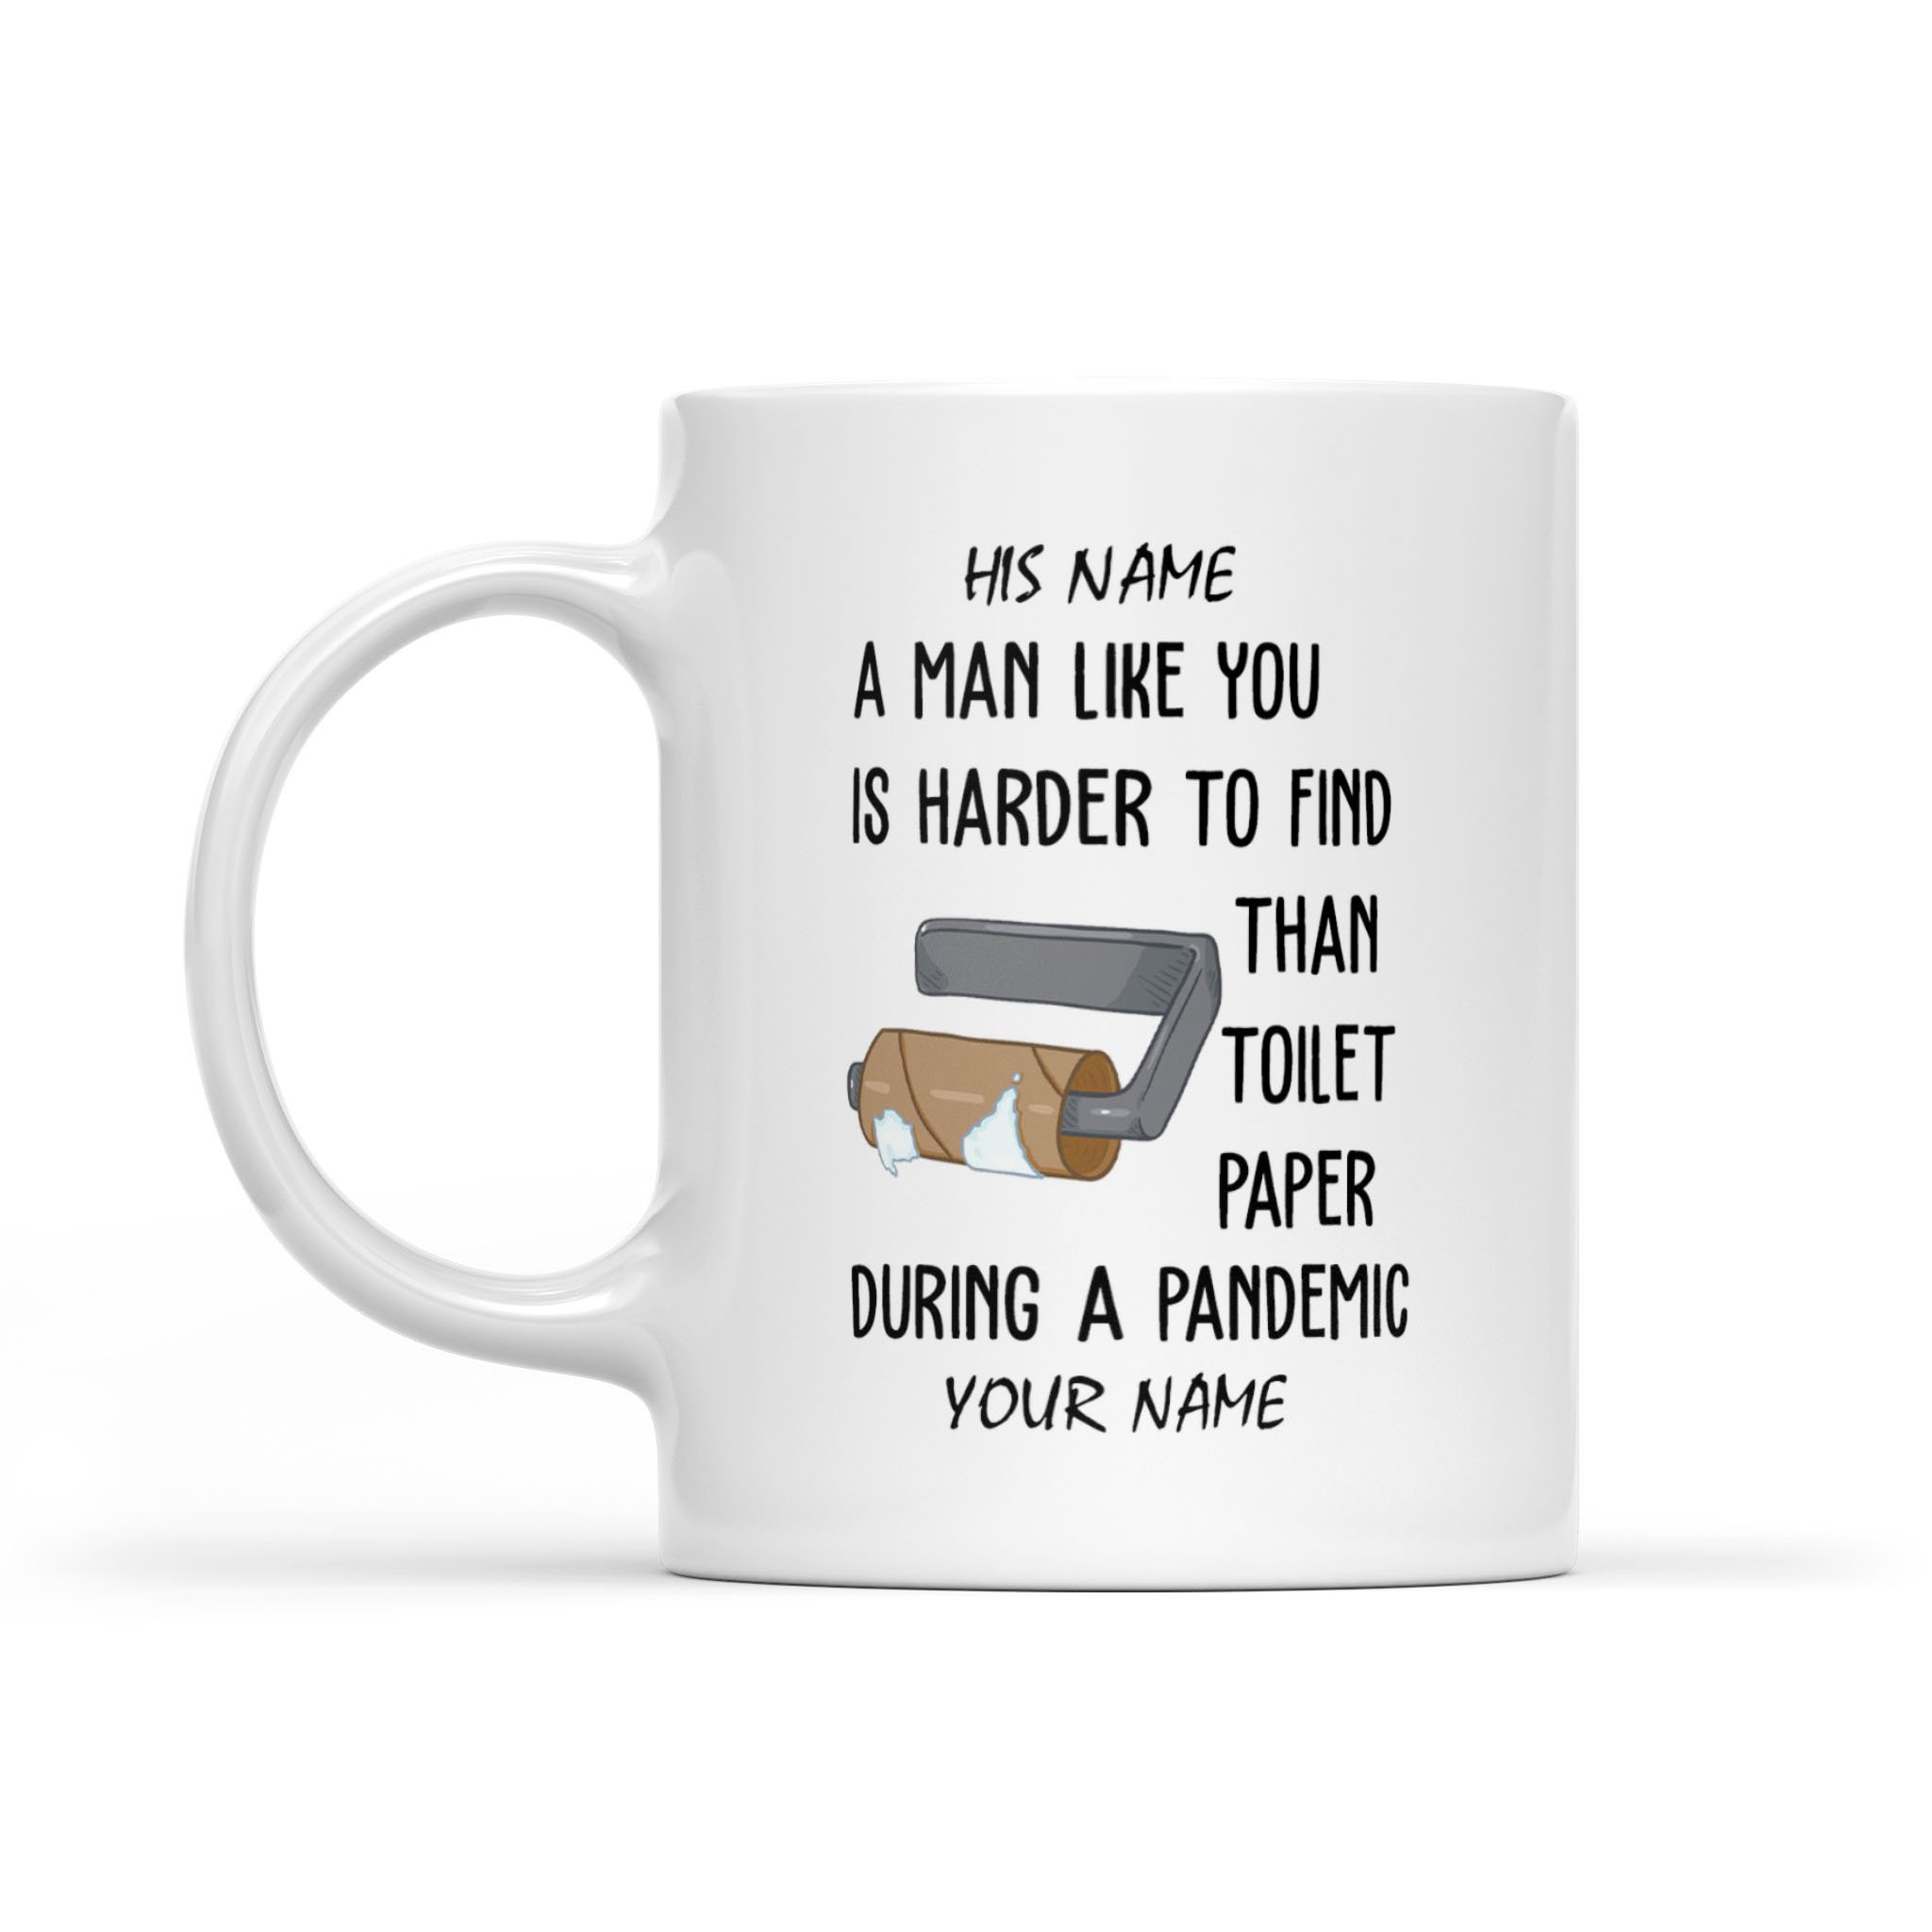 “A man like you is harder to find than toilet paper” valentine white mugs, Custom funny gifts for him, unique present for husband, boyfriend FFS – IPHW344